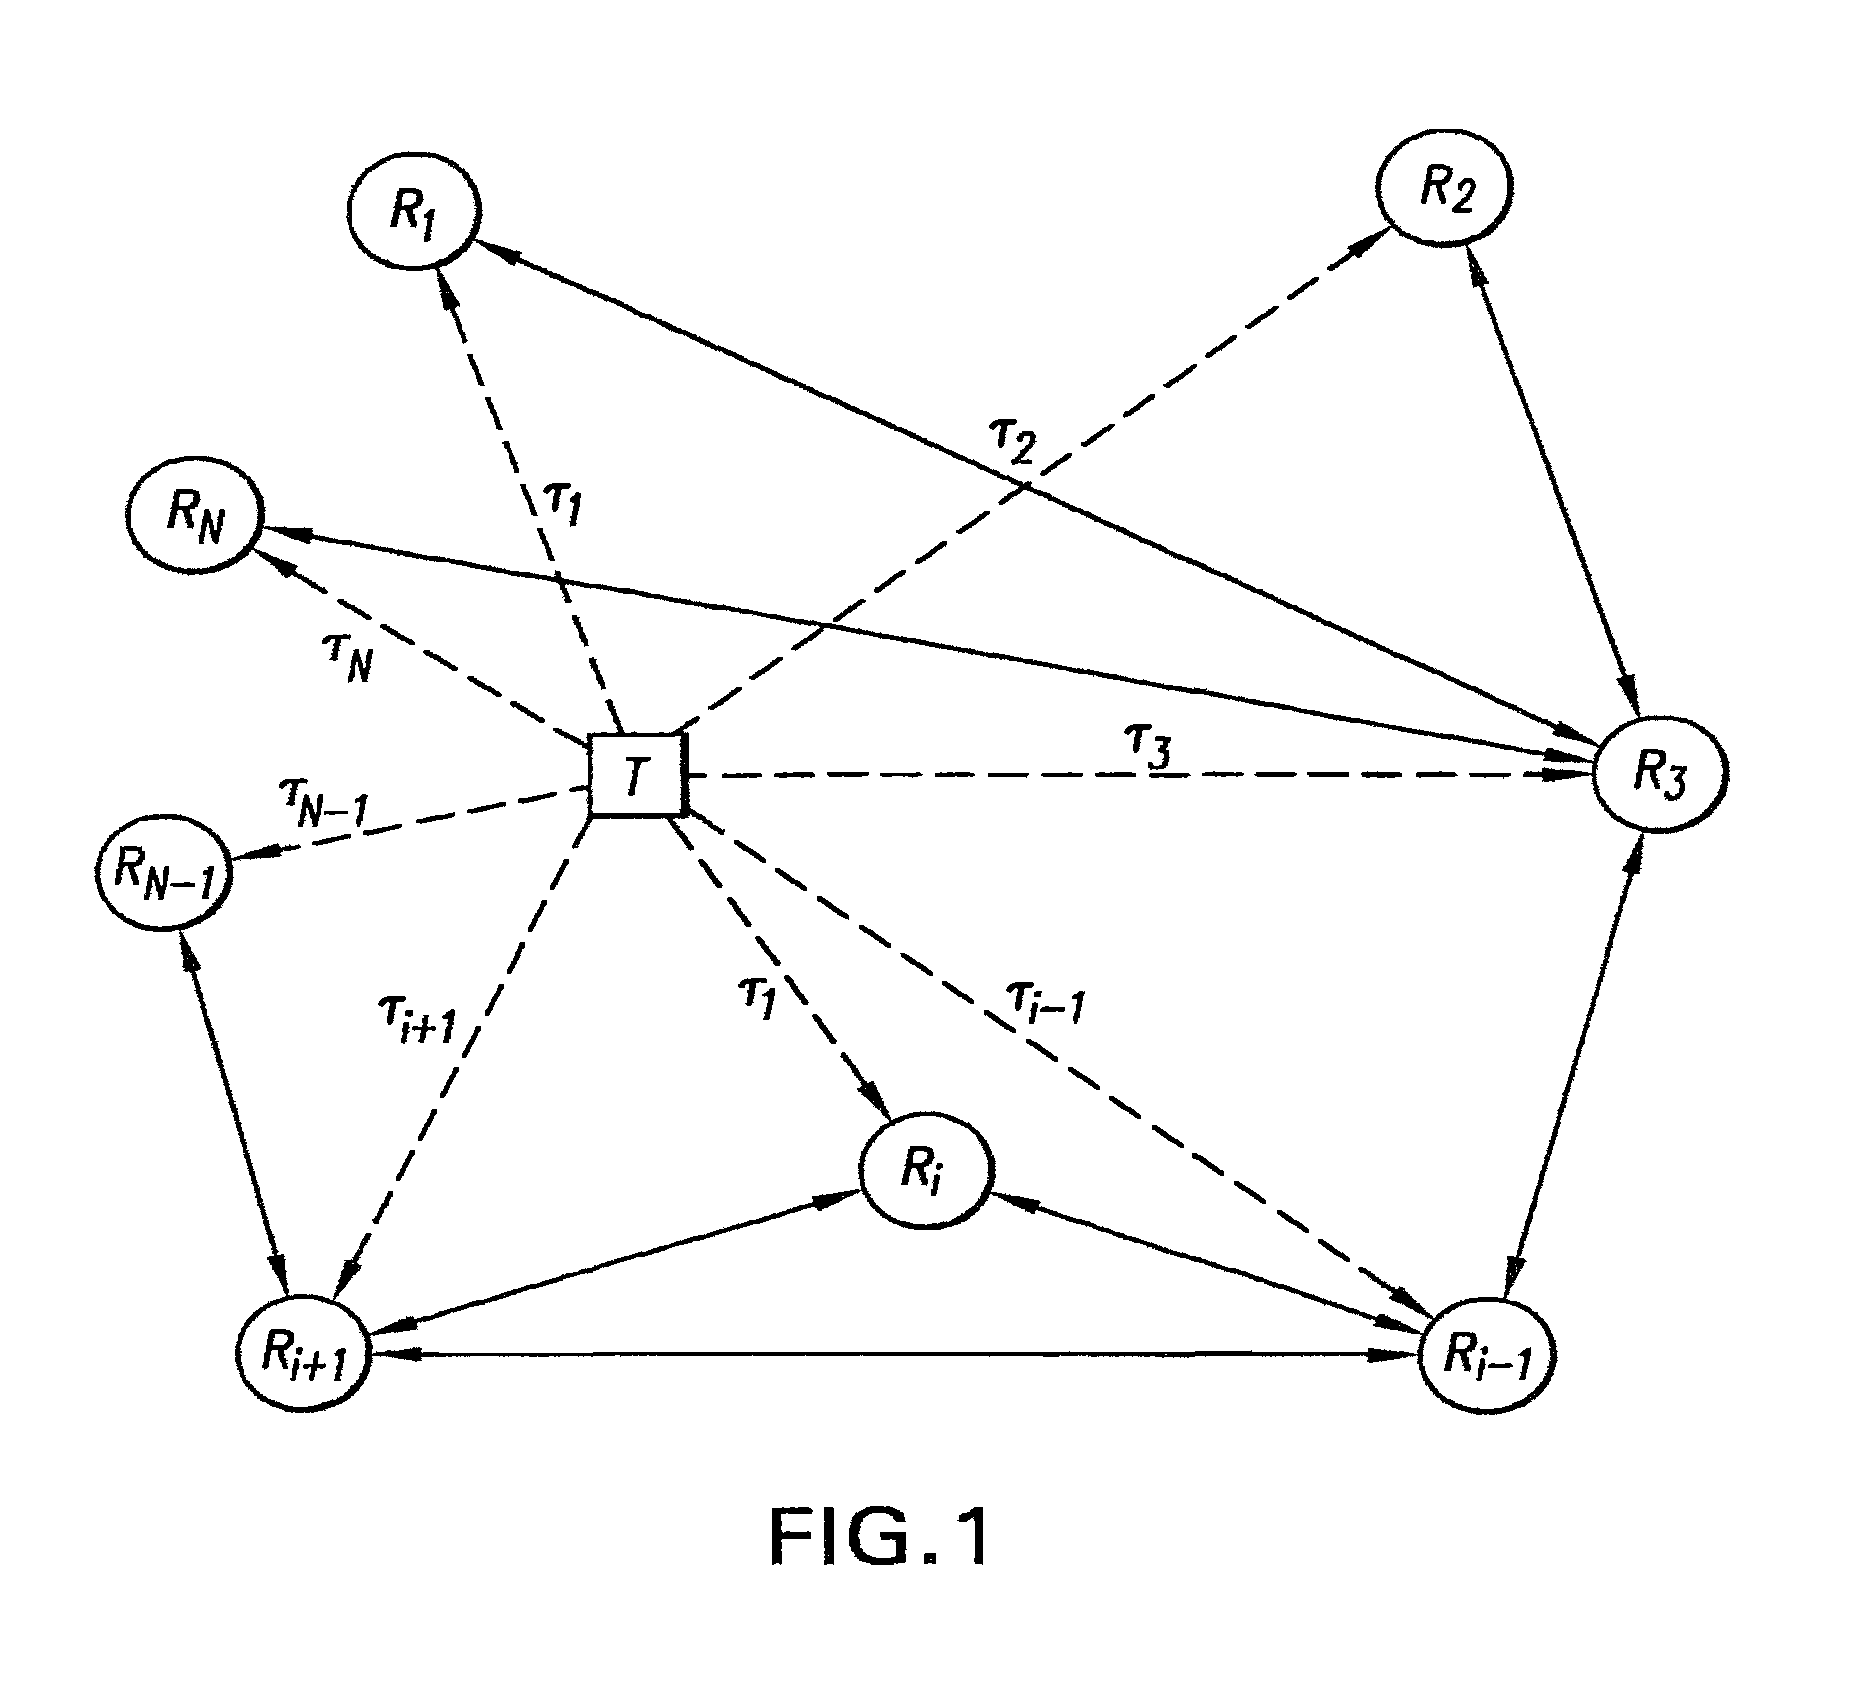 Method of spectrum mapping and exploitation using distributed sensors